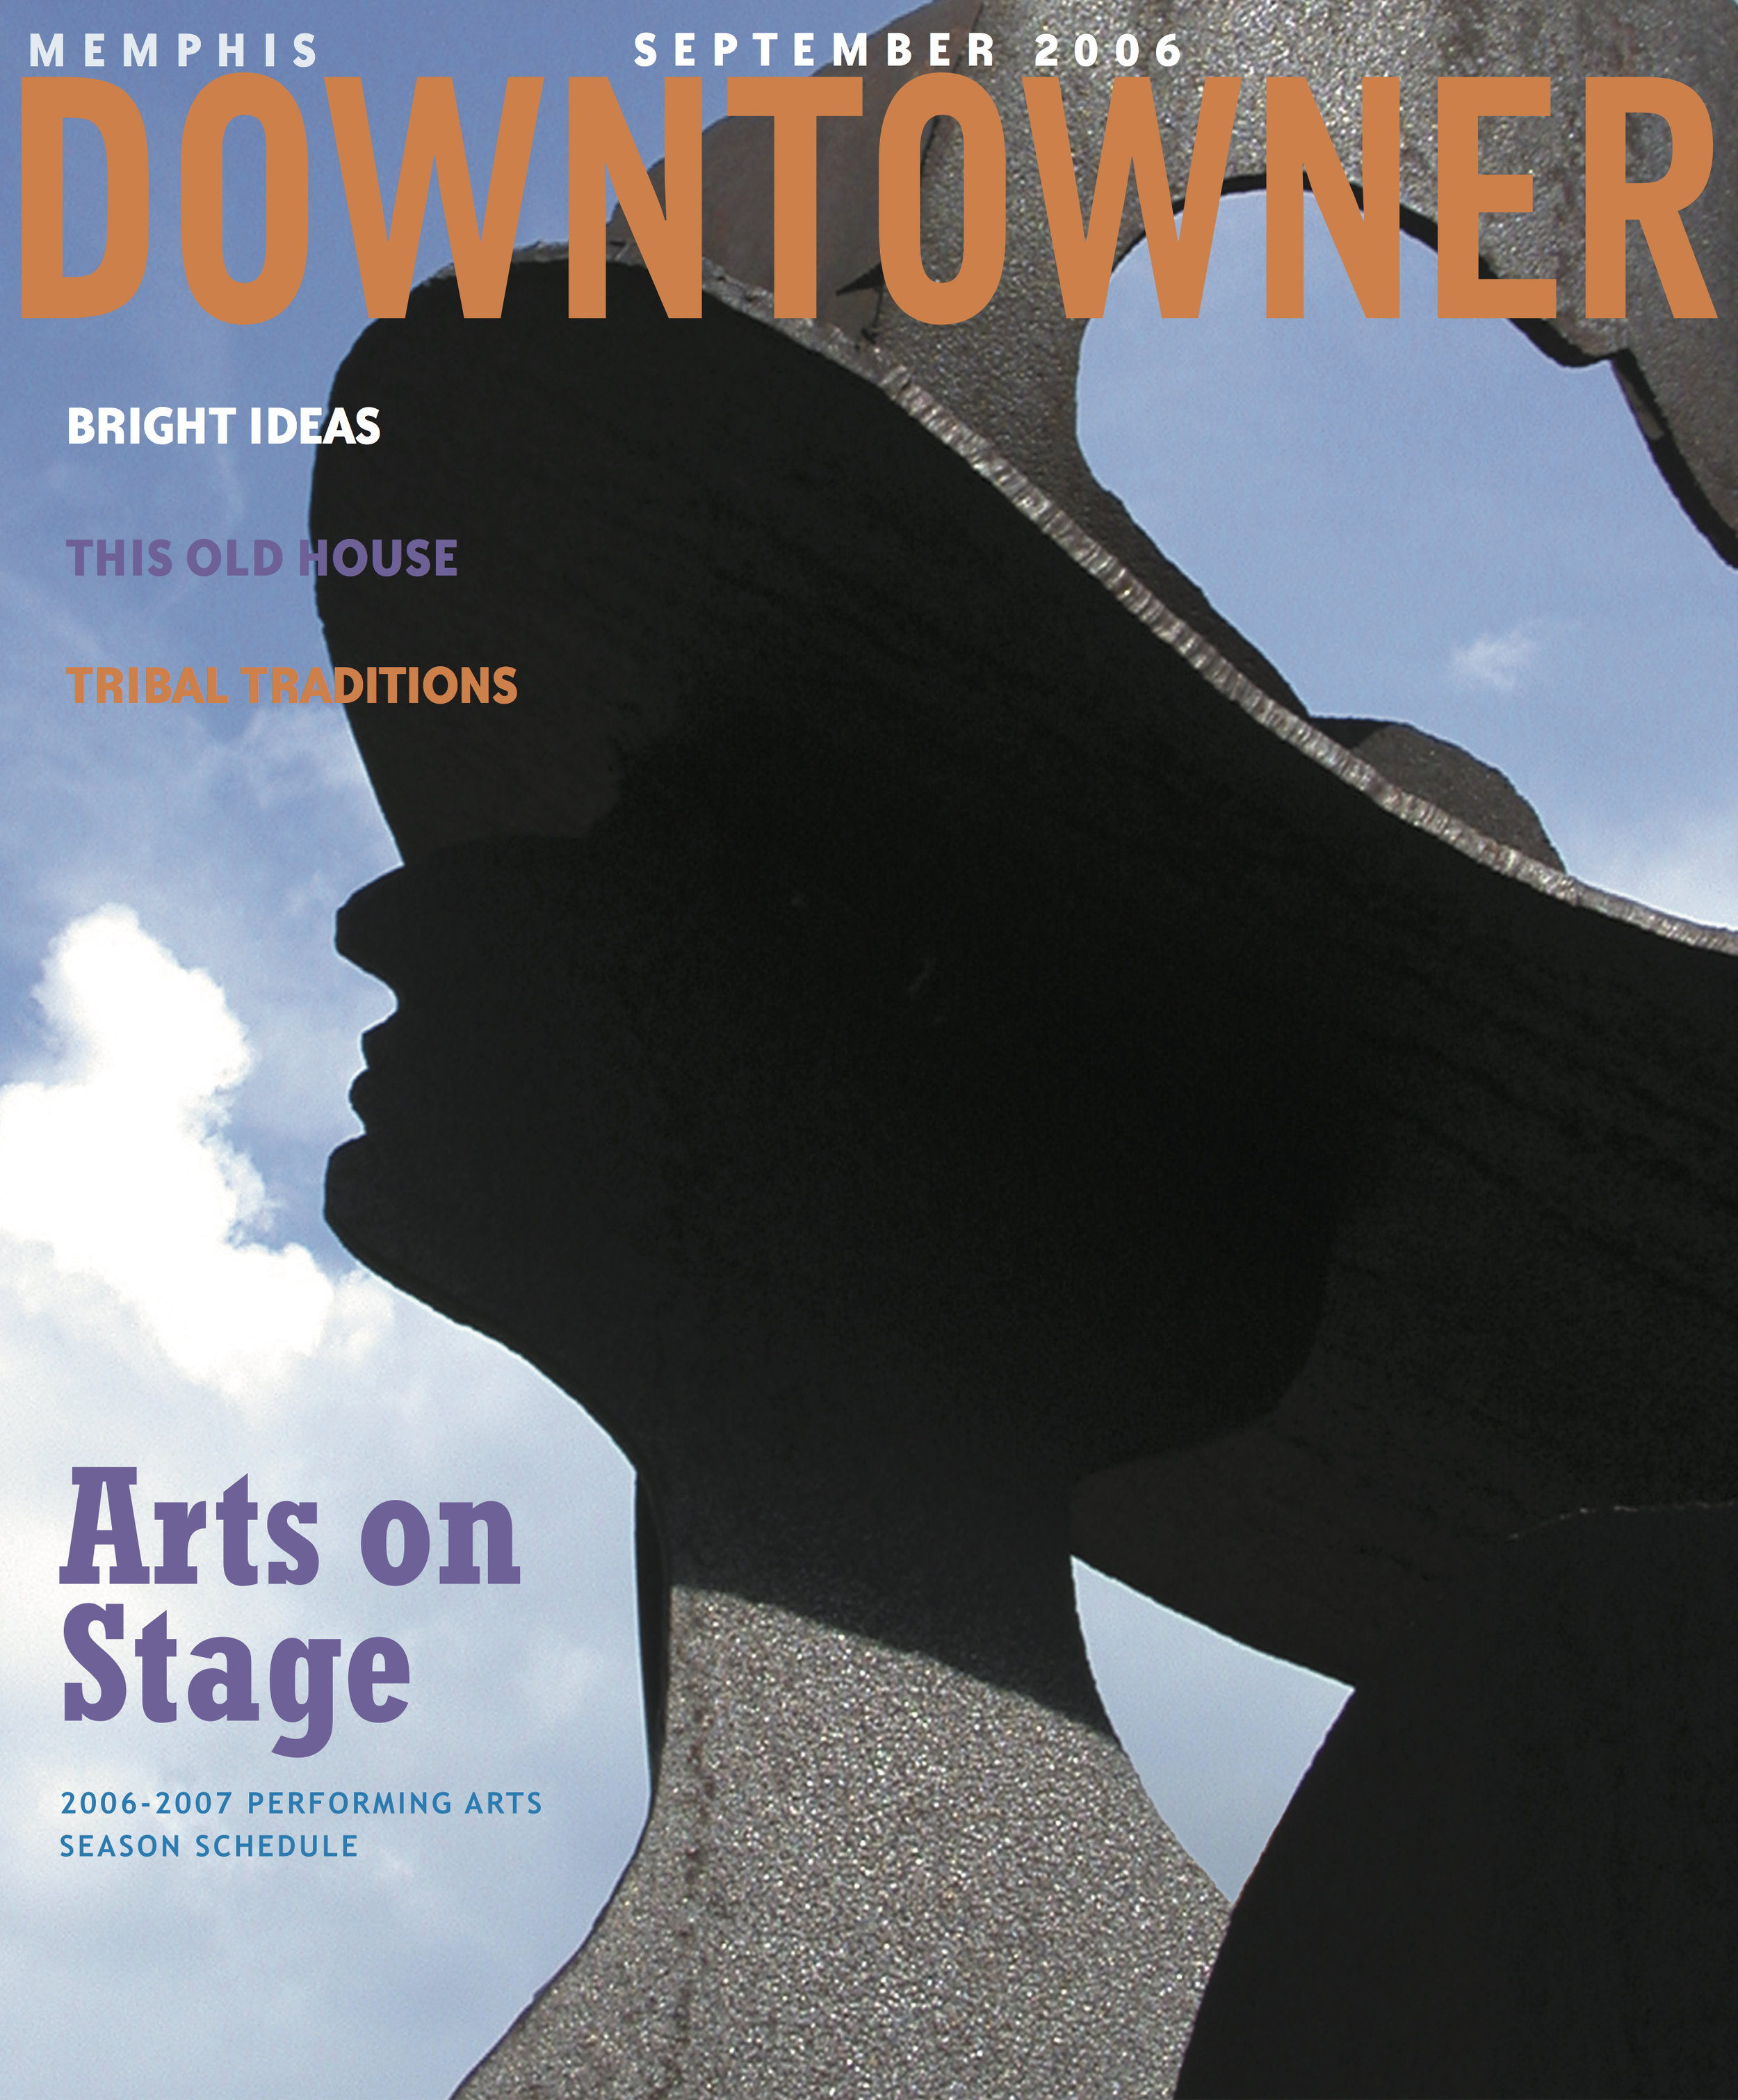  Memphis Downtowner Magazine  Performing Arts Schedule Issue  Theatre Memphis statue  Publication design by Chuck Mitchell  Photograph by Chuck Mitchell 